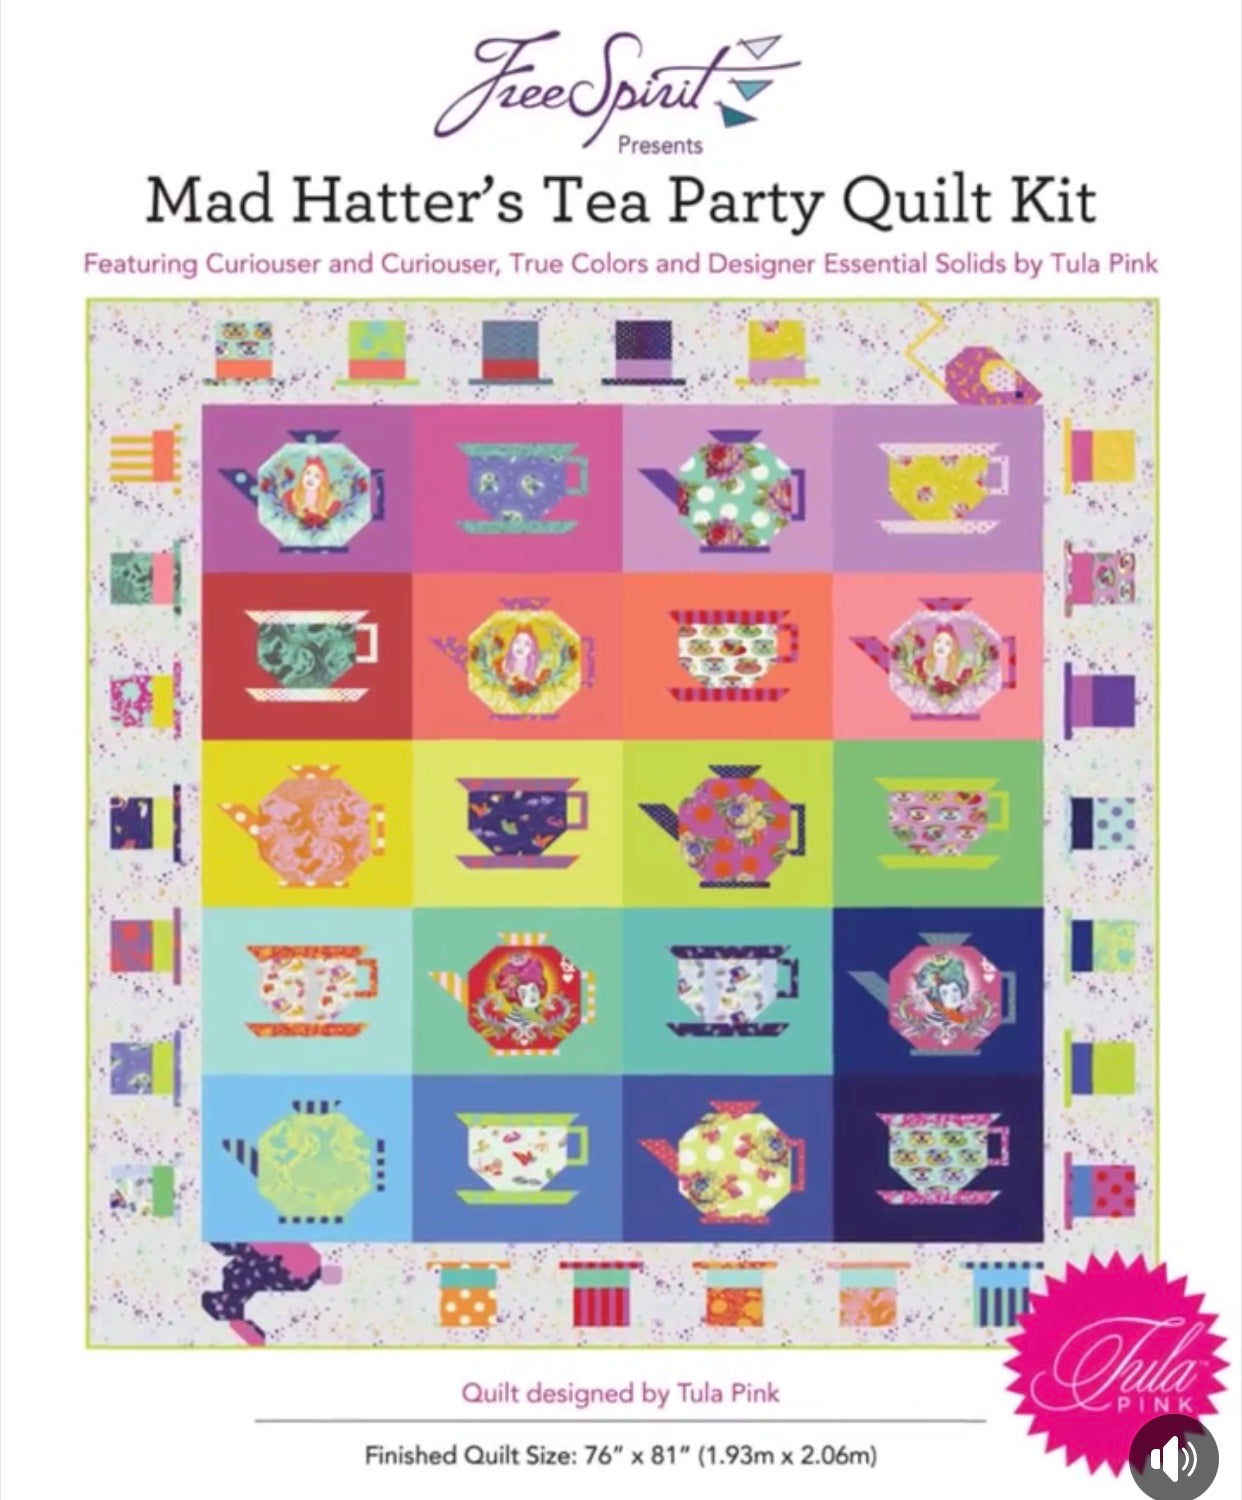 The Mad Hatter Tea Party Quilt Kit